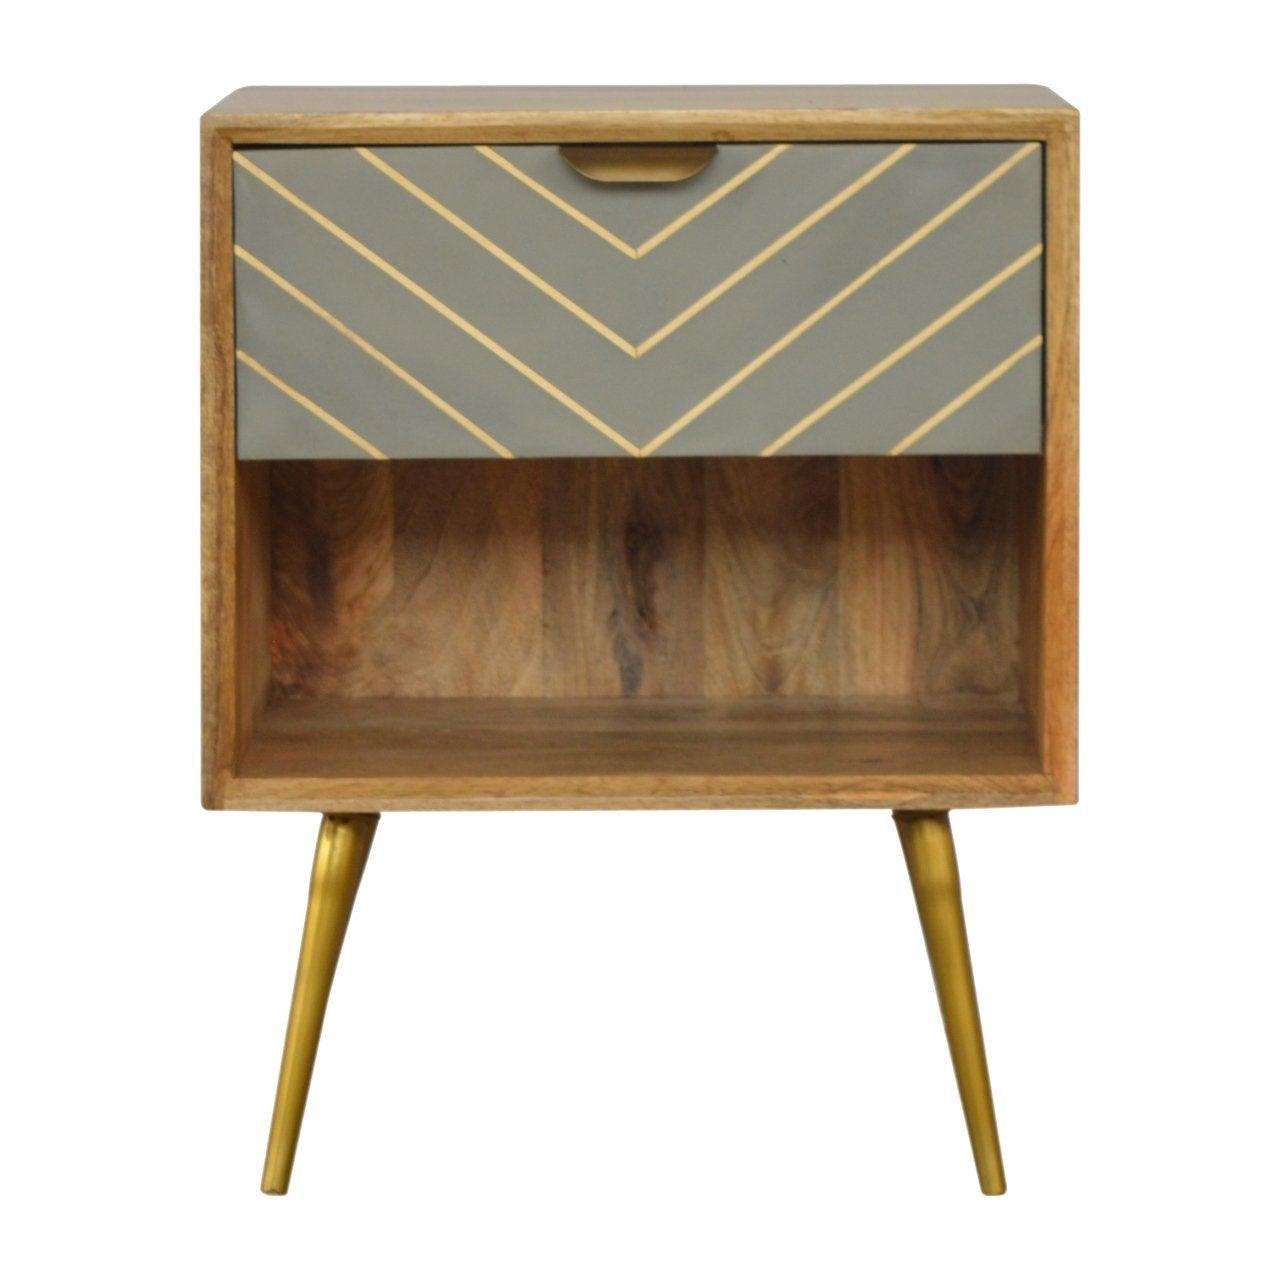 Sleek cement brass inlay bedside table with open slot - crimblefest furniture - image 1